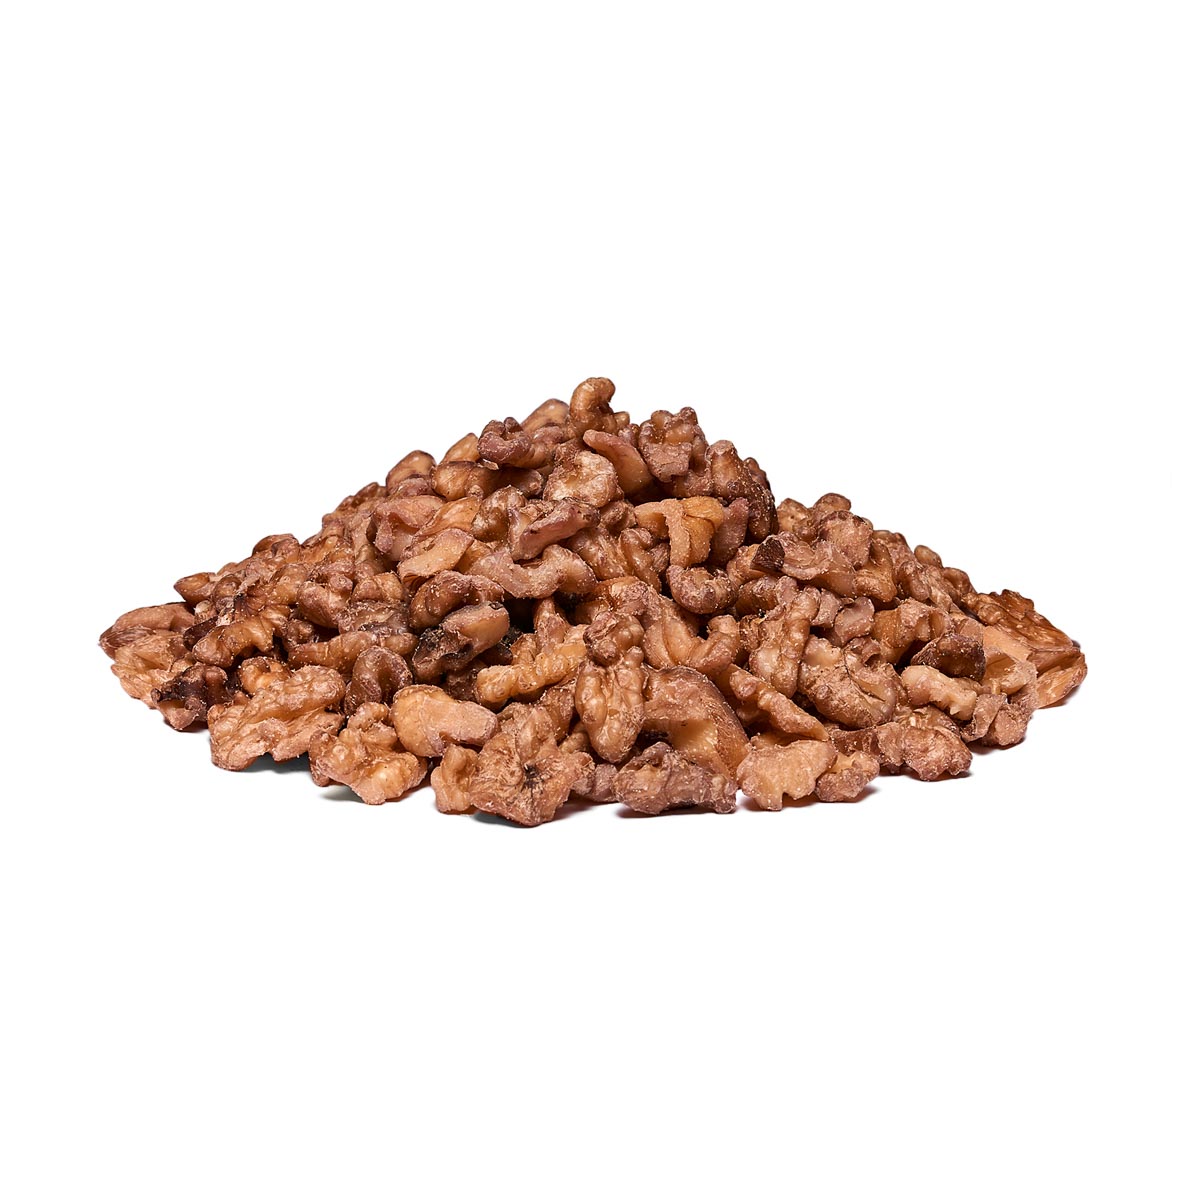 Organic Activated Walnuts | Raw Living UK | Raw Foods | Nuts &amp; Seeds | Raw Living Organic Activated Walnuts: we activate these Walnuts to release the Phytic Acid &amp; Enzyme Inhibitors. These Walnuts are slightly Crunchy &amp; Salty.